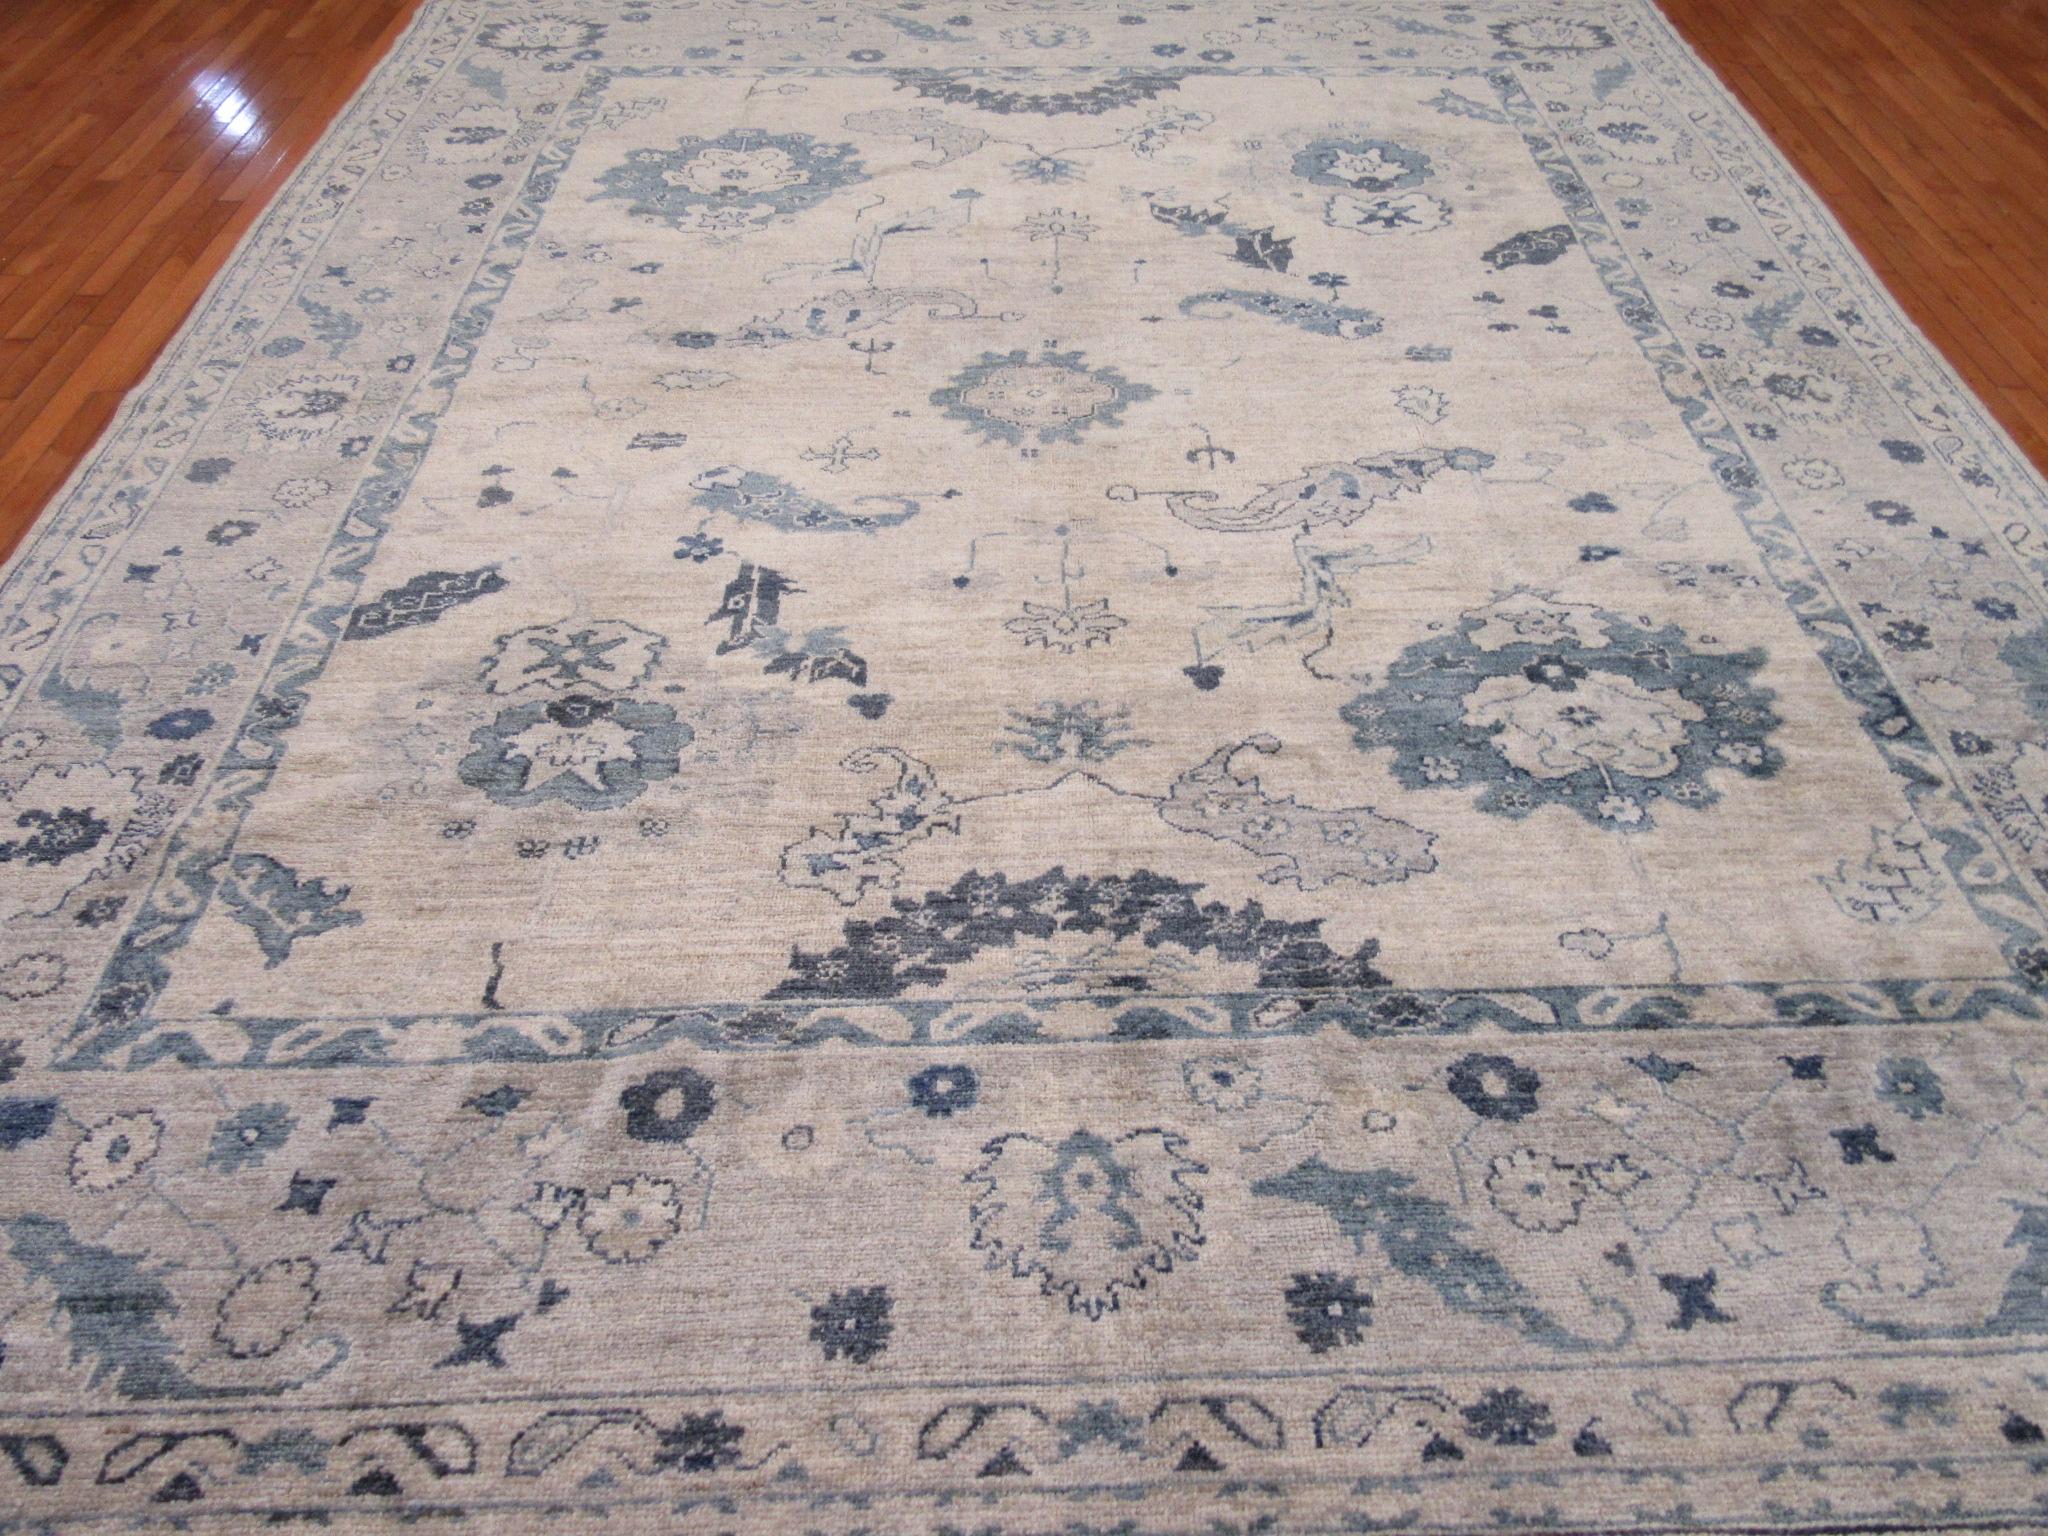 This is a new hand-knotted Oushak rug from Turkey. It is made with all Fine Turkish wool in a large-scale all-over pattern. Only few colors ivory , gray and blue have been used to create a mellow cool patina. The rug measures 10' 4'' x 13' an ideal